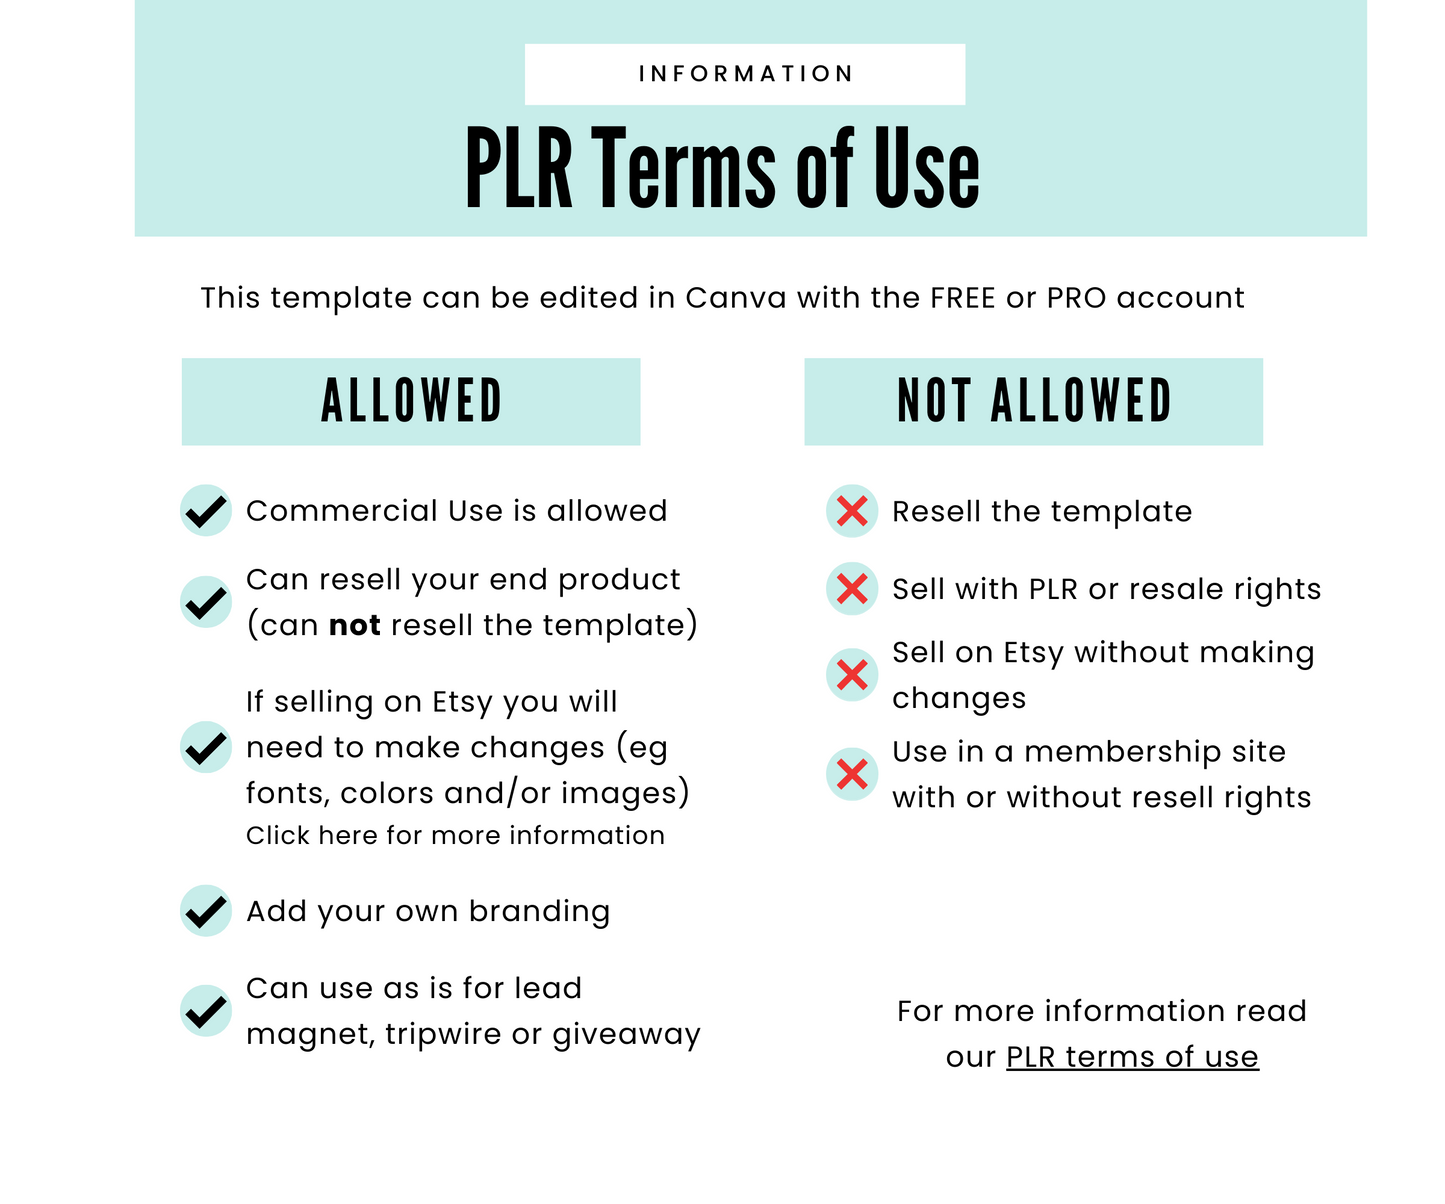 PLR Terms of Use what is allowed and what is not allowed